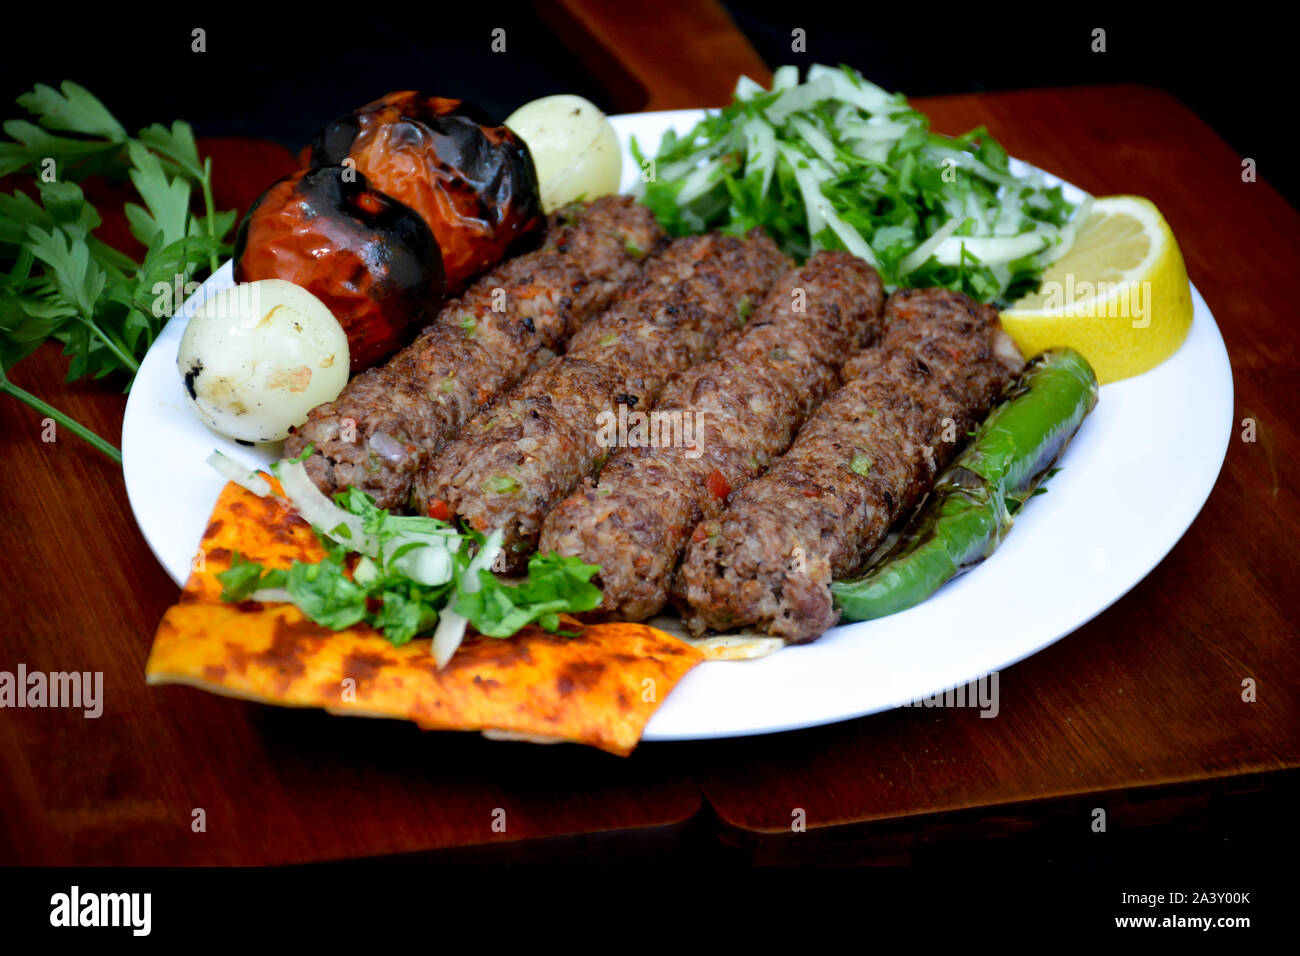 Plate of Traditional arab eastern meal - selections of kebabs Stock Photo